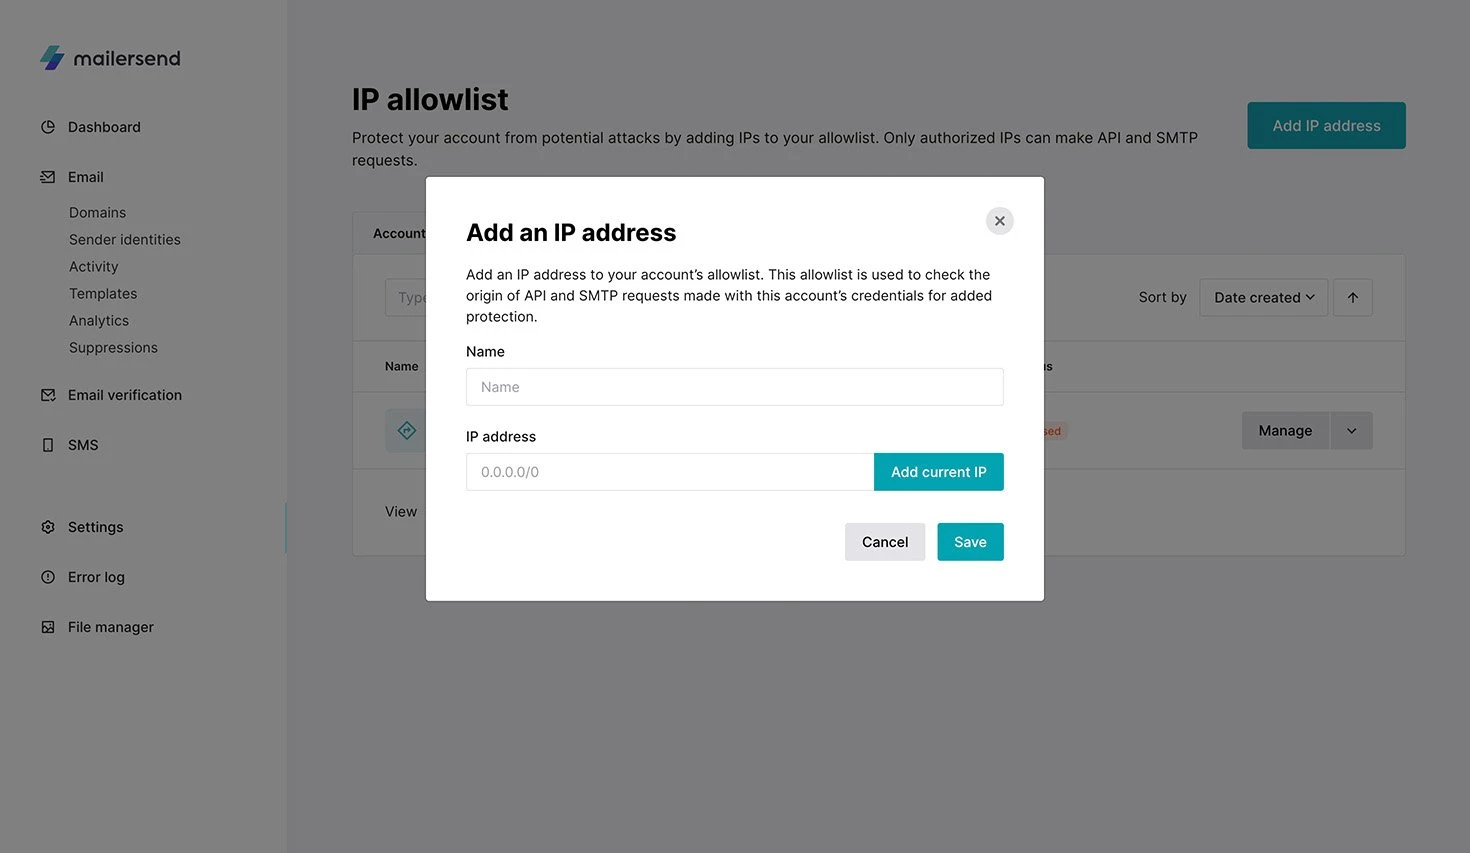 A view of the IP allowlist page with the pop-up screen to add an IP.